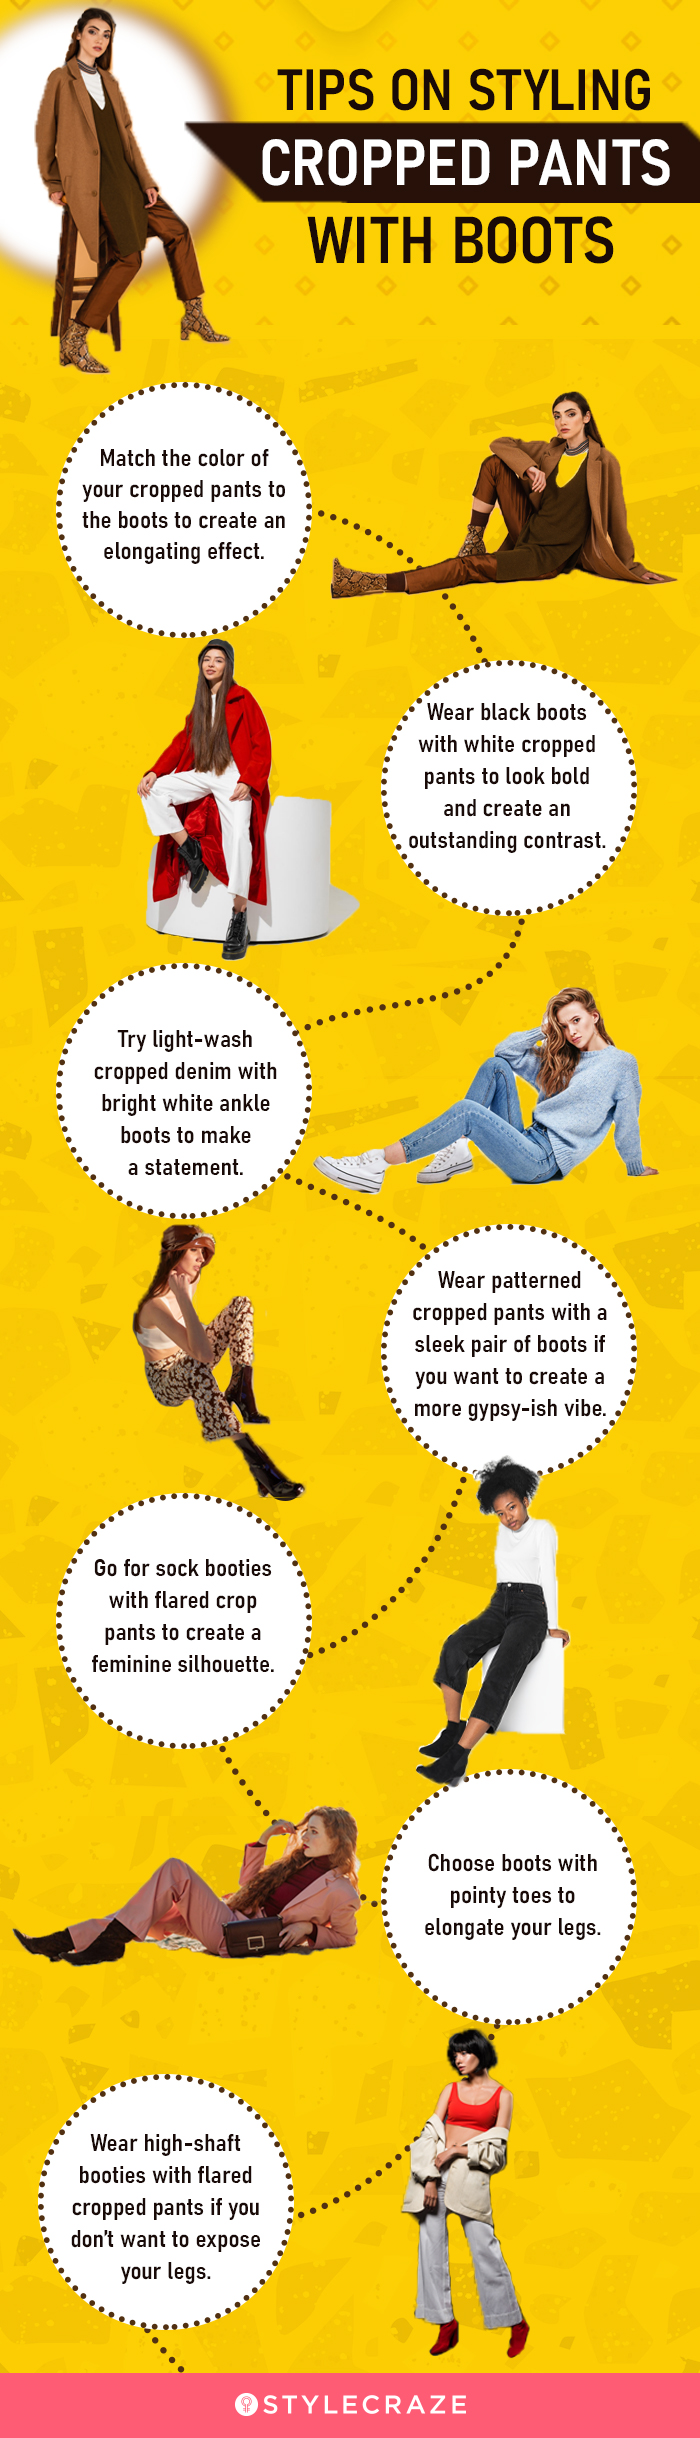 tips on styling cropped pants with boots [infographic]